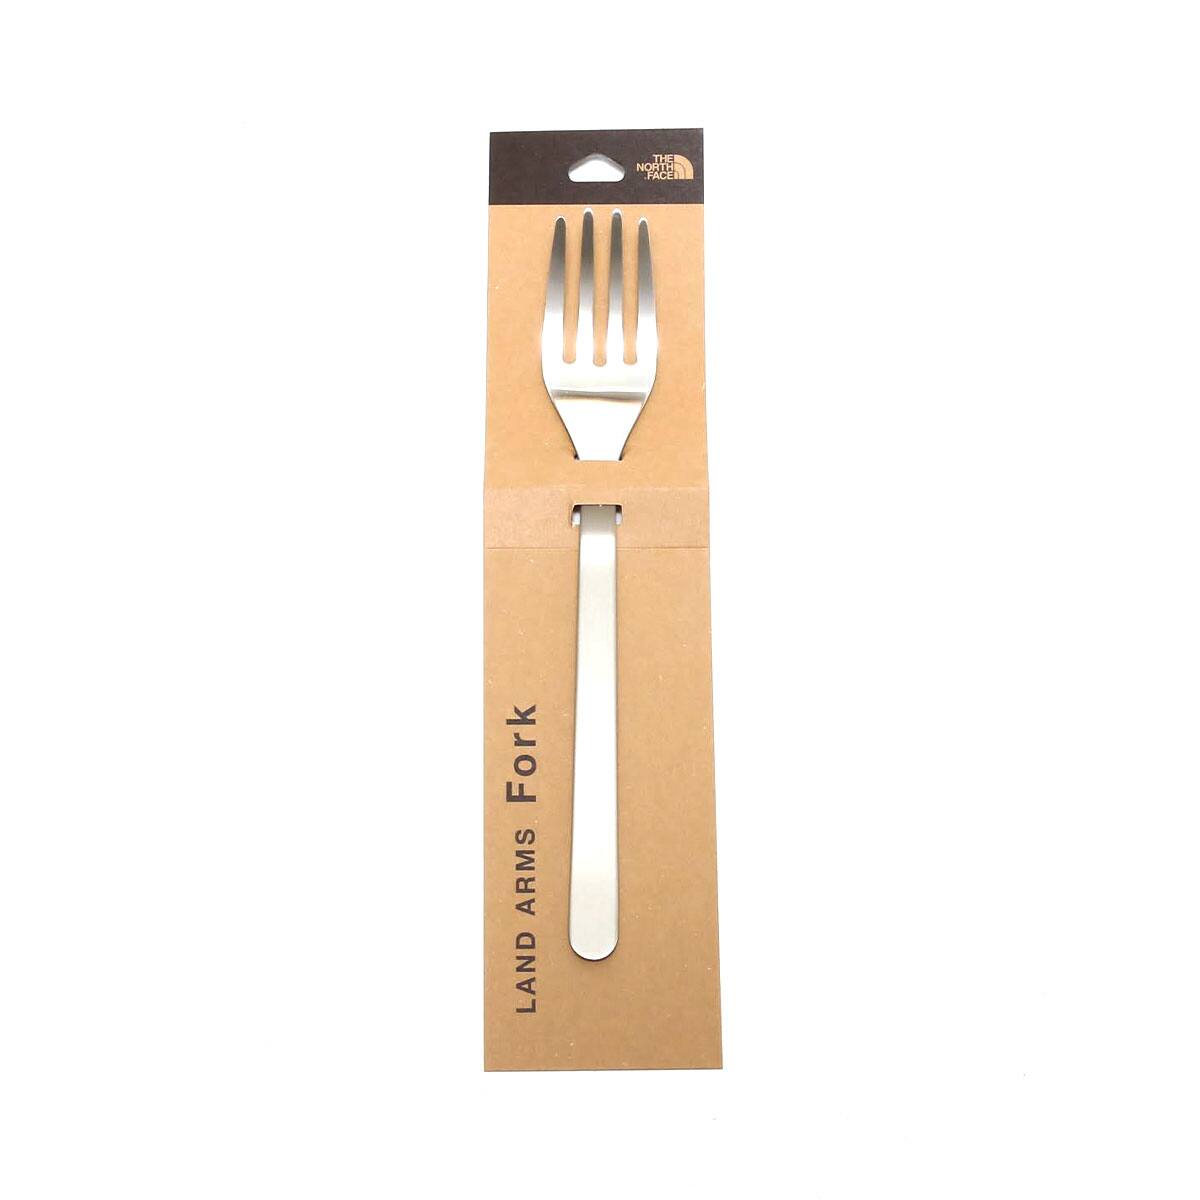 THE NORTH FACE LAND ARMS FORK SILVER 22SS-I